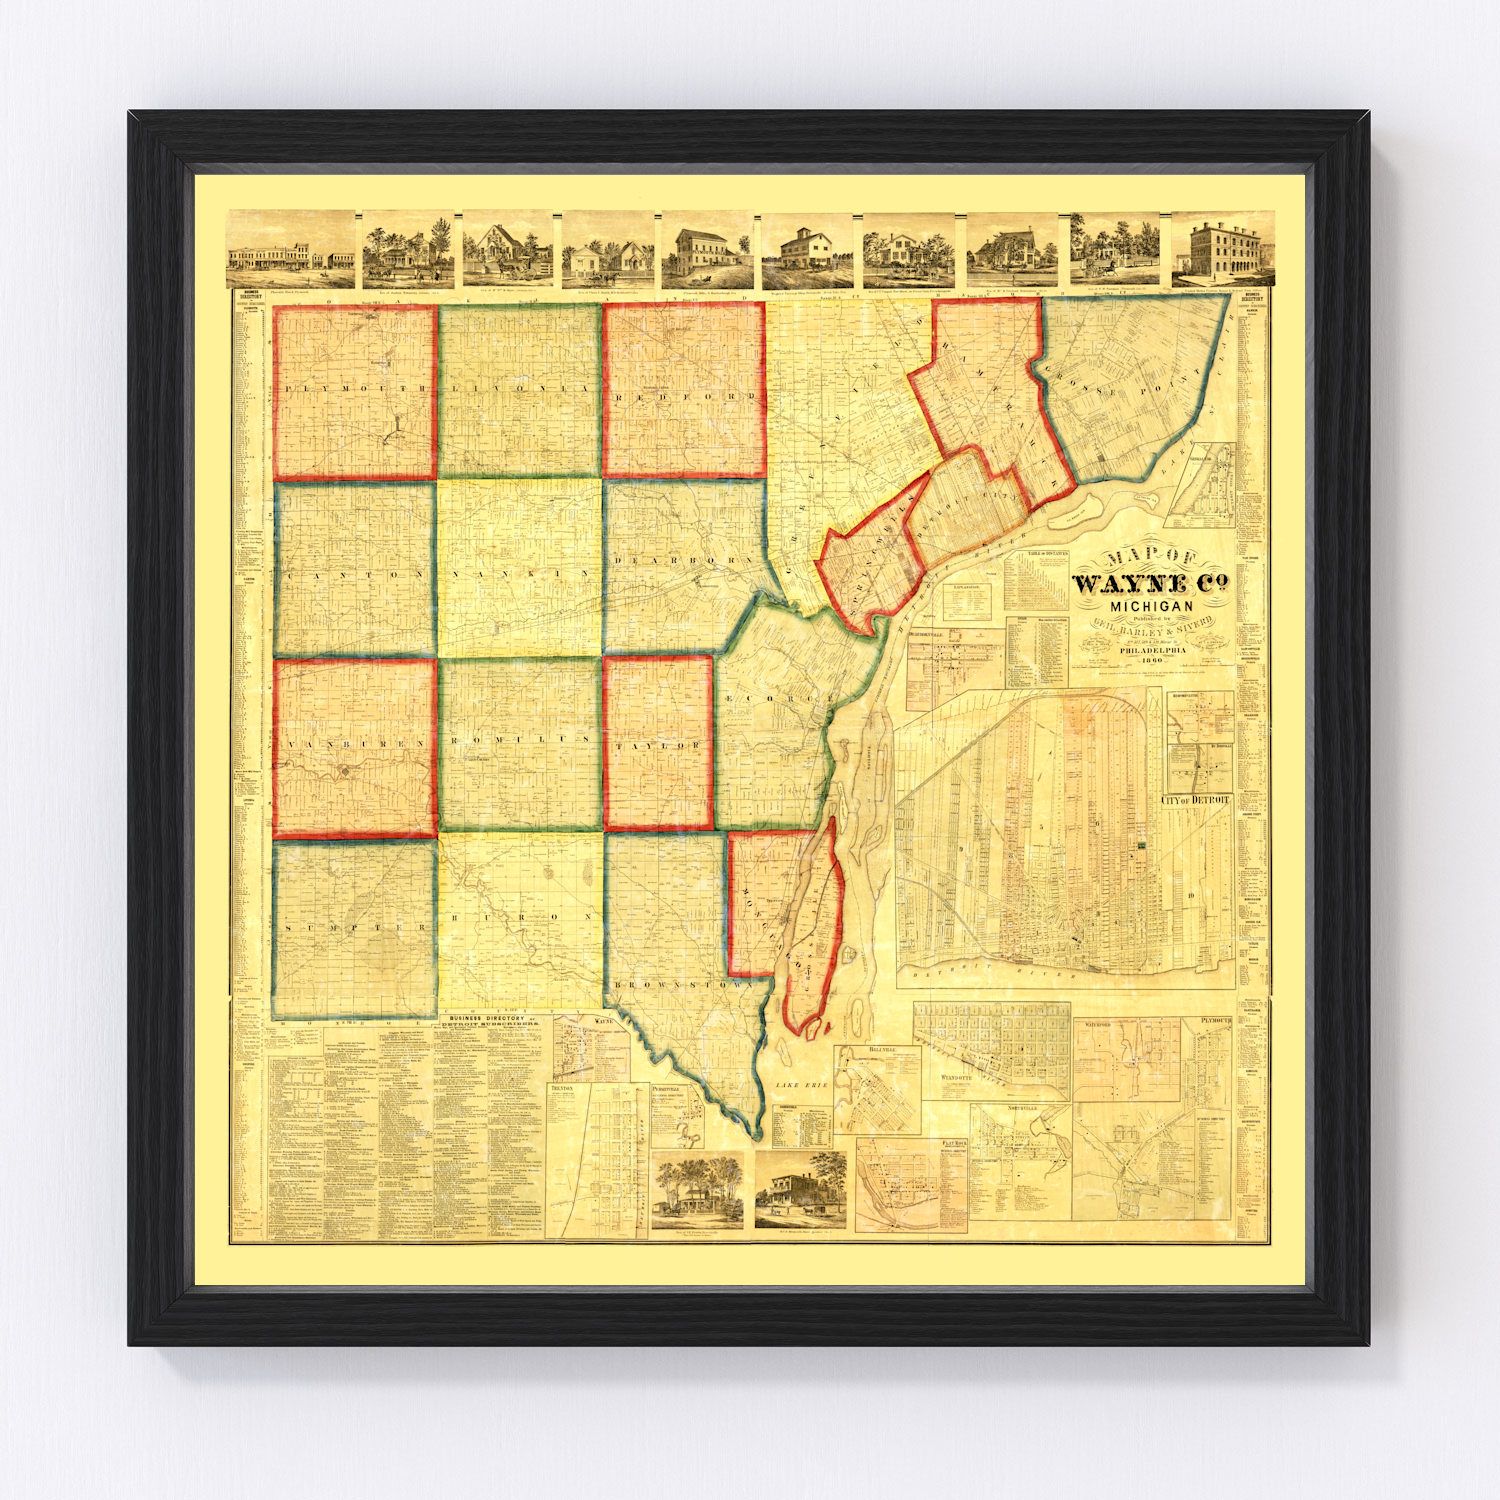 Vintage Map Of Wayne County Michigan 1860 By Teds Vintage Art 2704